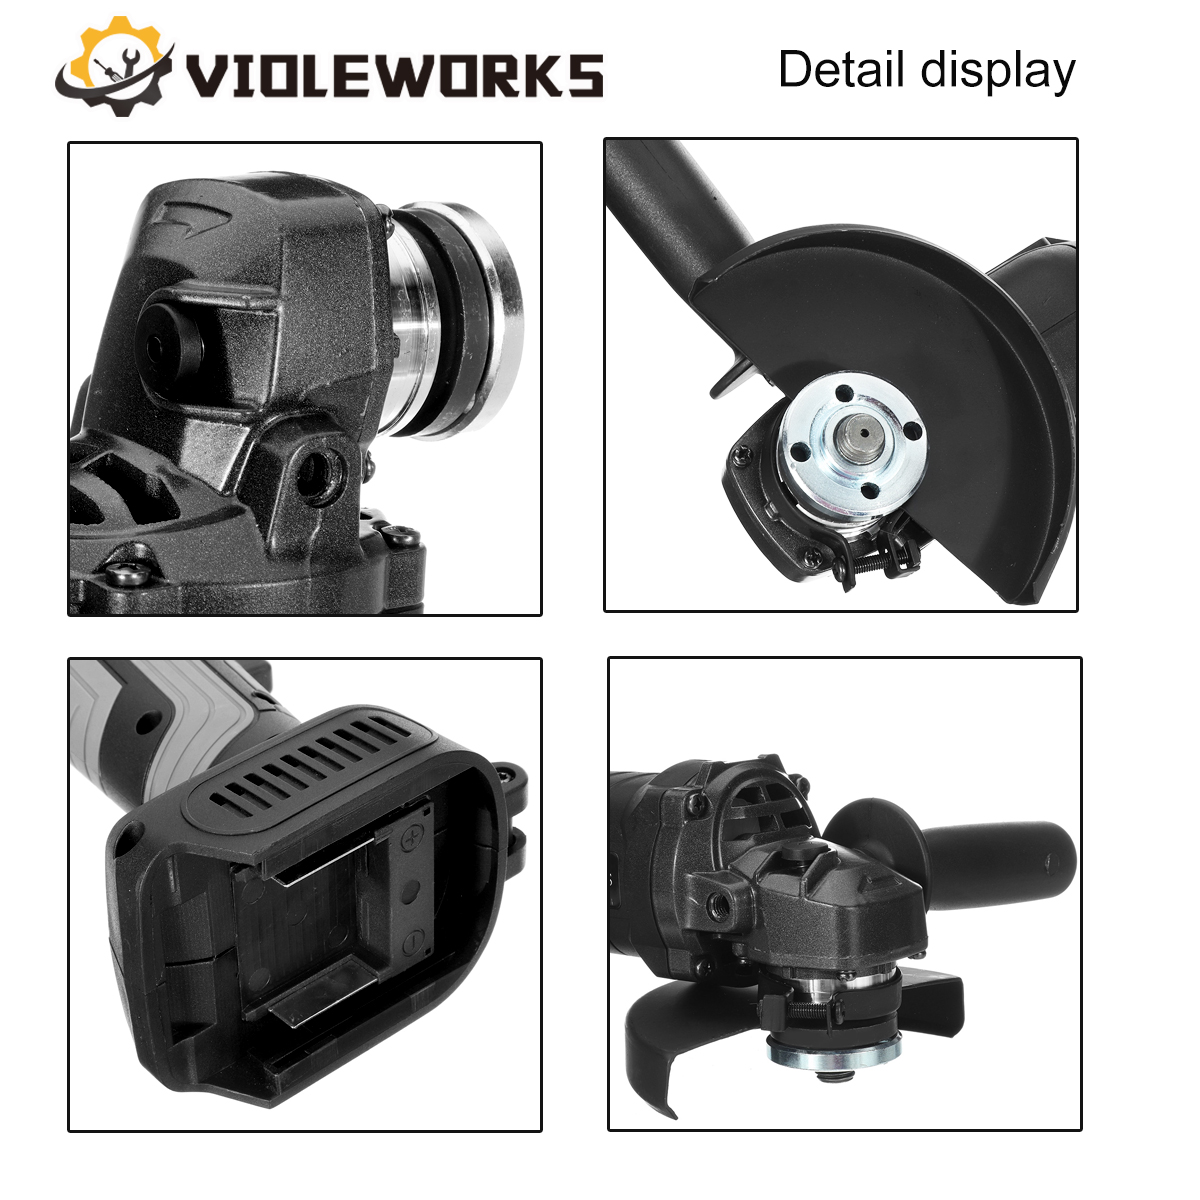 VIOLEWORKS-288VF-125mm-Cordless-Angle-Grinder-3-Gears-Brushless-Electric-Metal-Stone-Wood-Cutting-Po-1839464-9